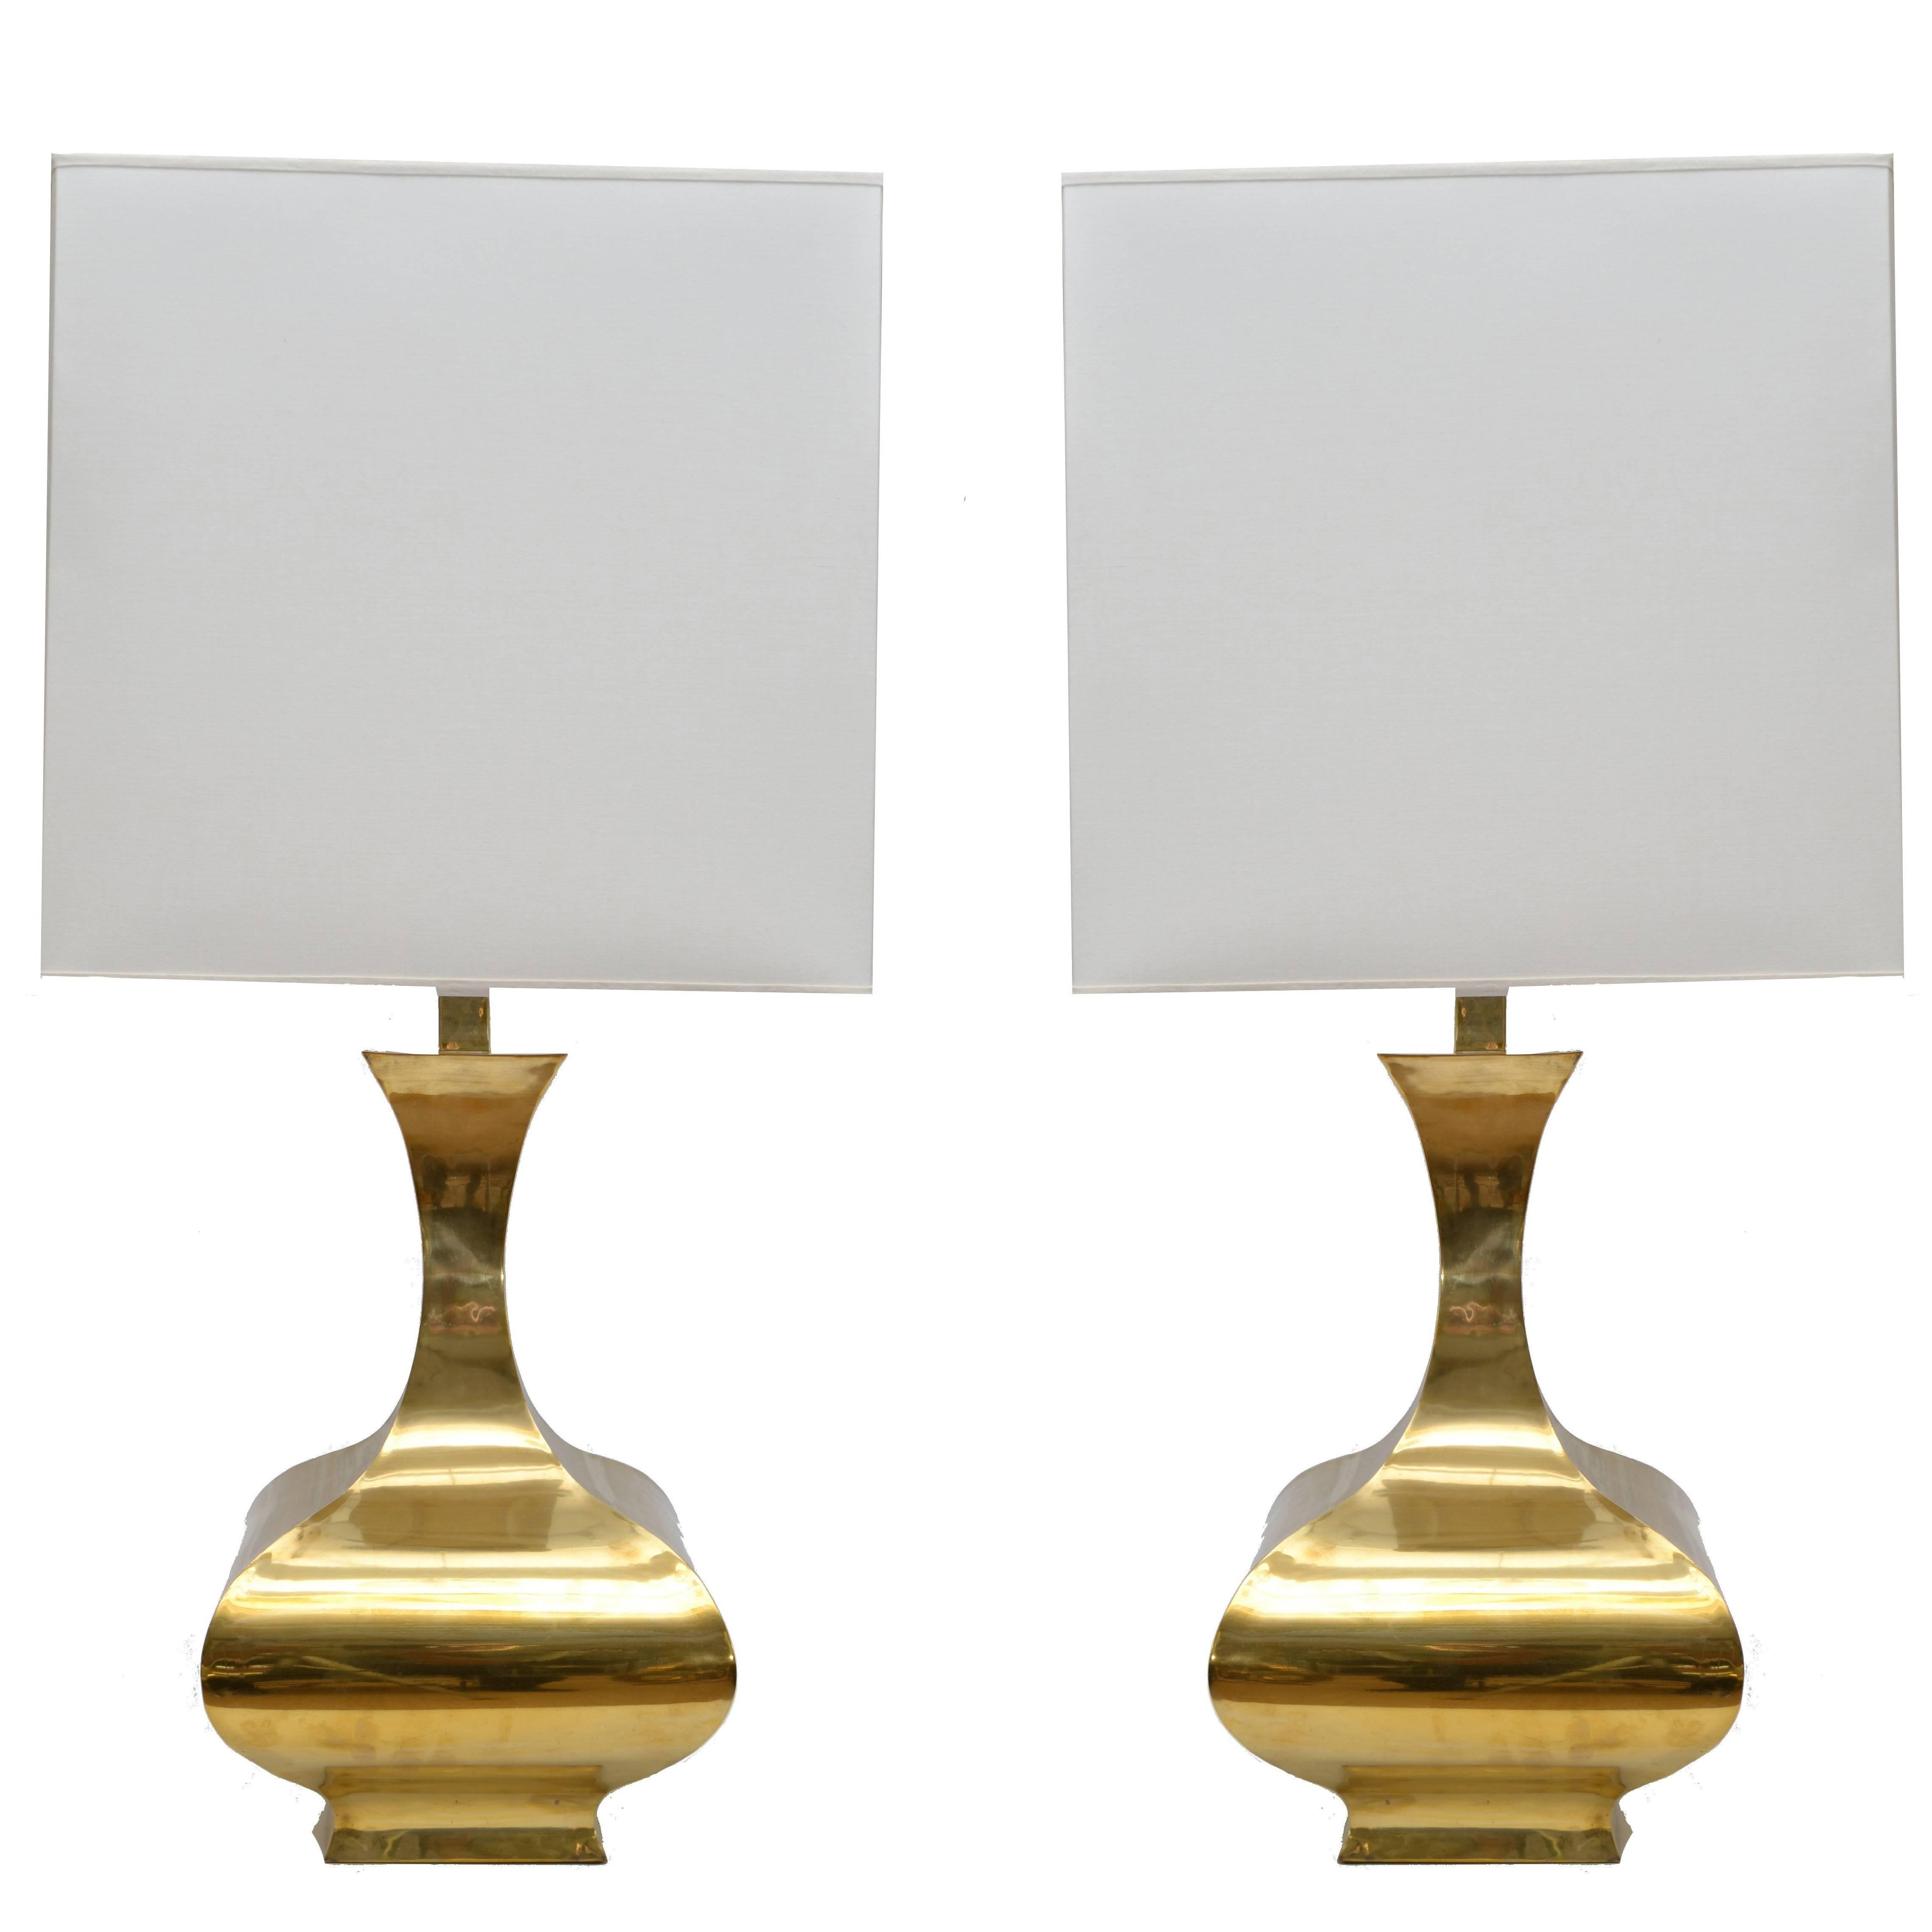 Stunning Mid-Century Modern pair of solid brass table lamps in vessel shape with shades.
In perfect working condition and each lamp uses 2 max. 60 W light bulbs.
Height to top of lamp: 39.5 inches.